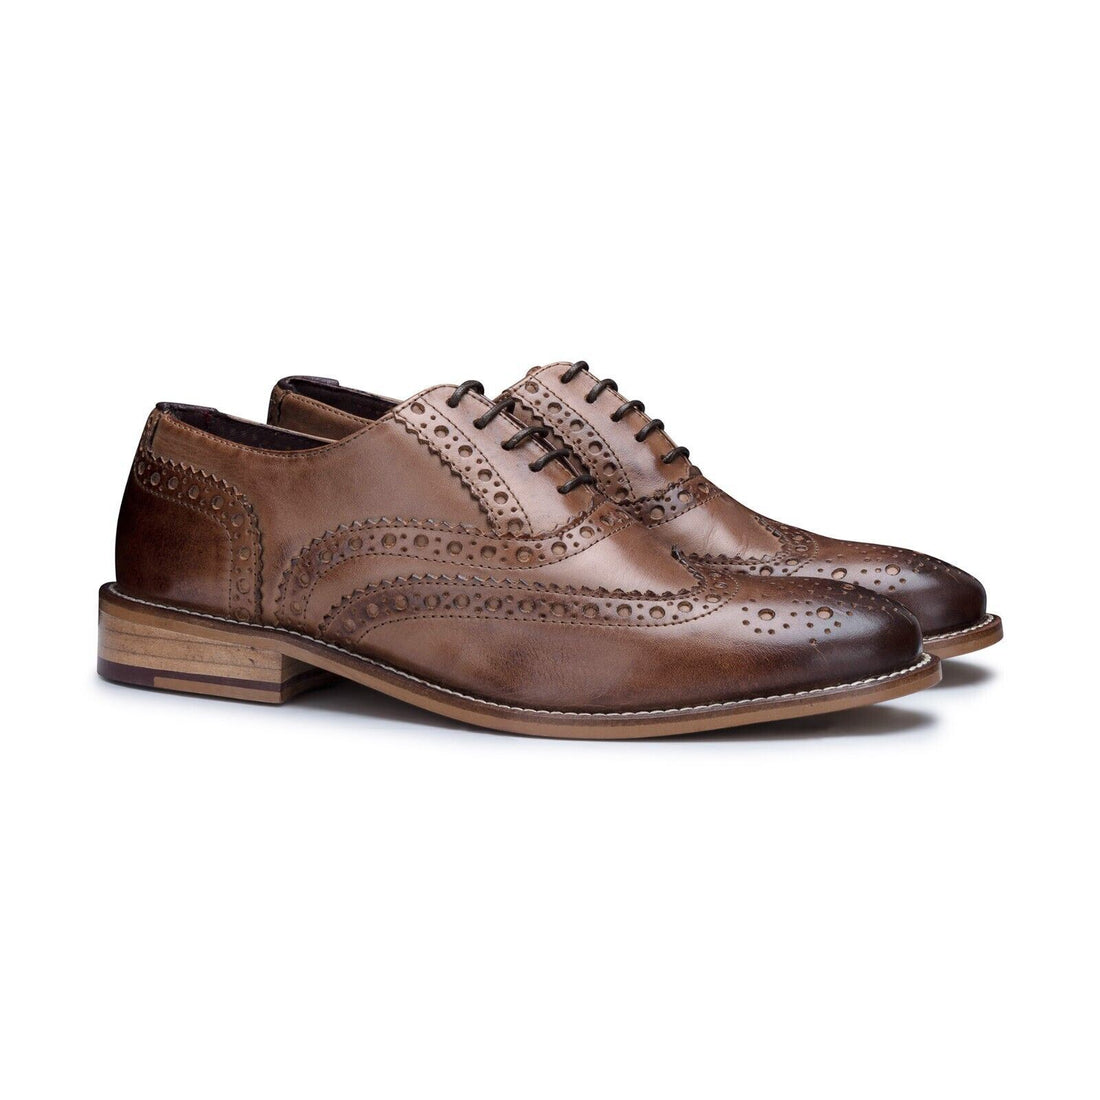 Mens Classic Oxford Chestnut-Brown Leather Gatsby Brogue Shoes - Upperclass Fashions 